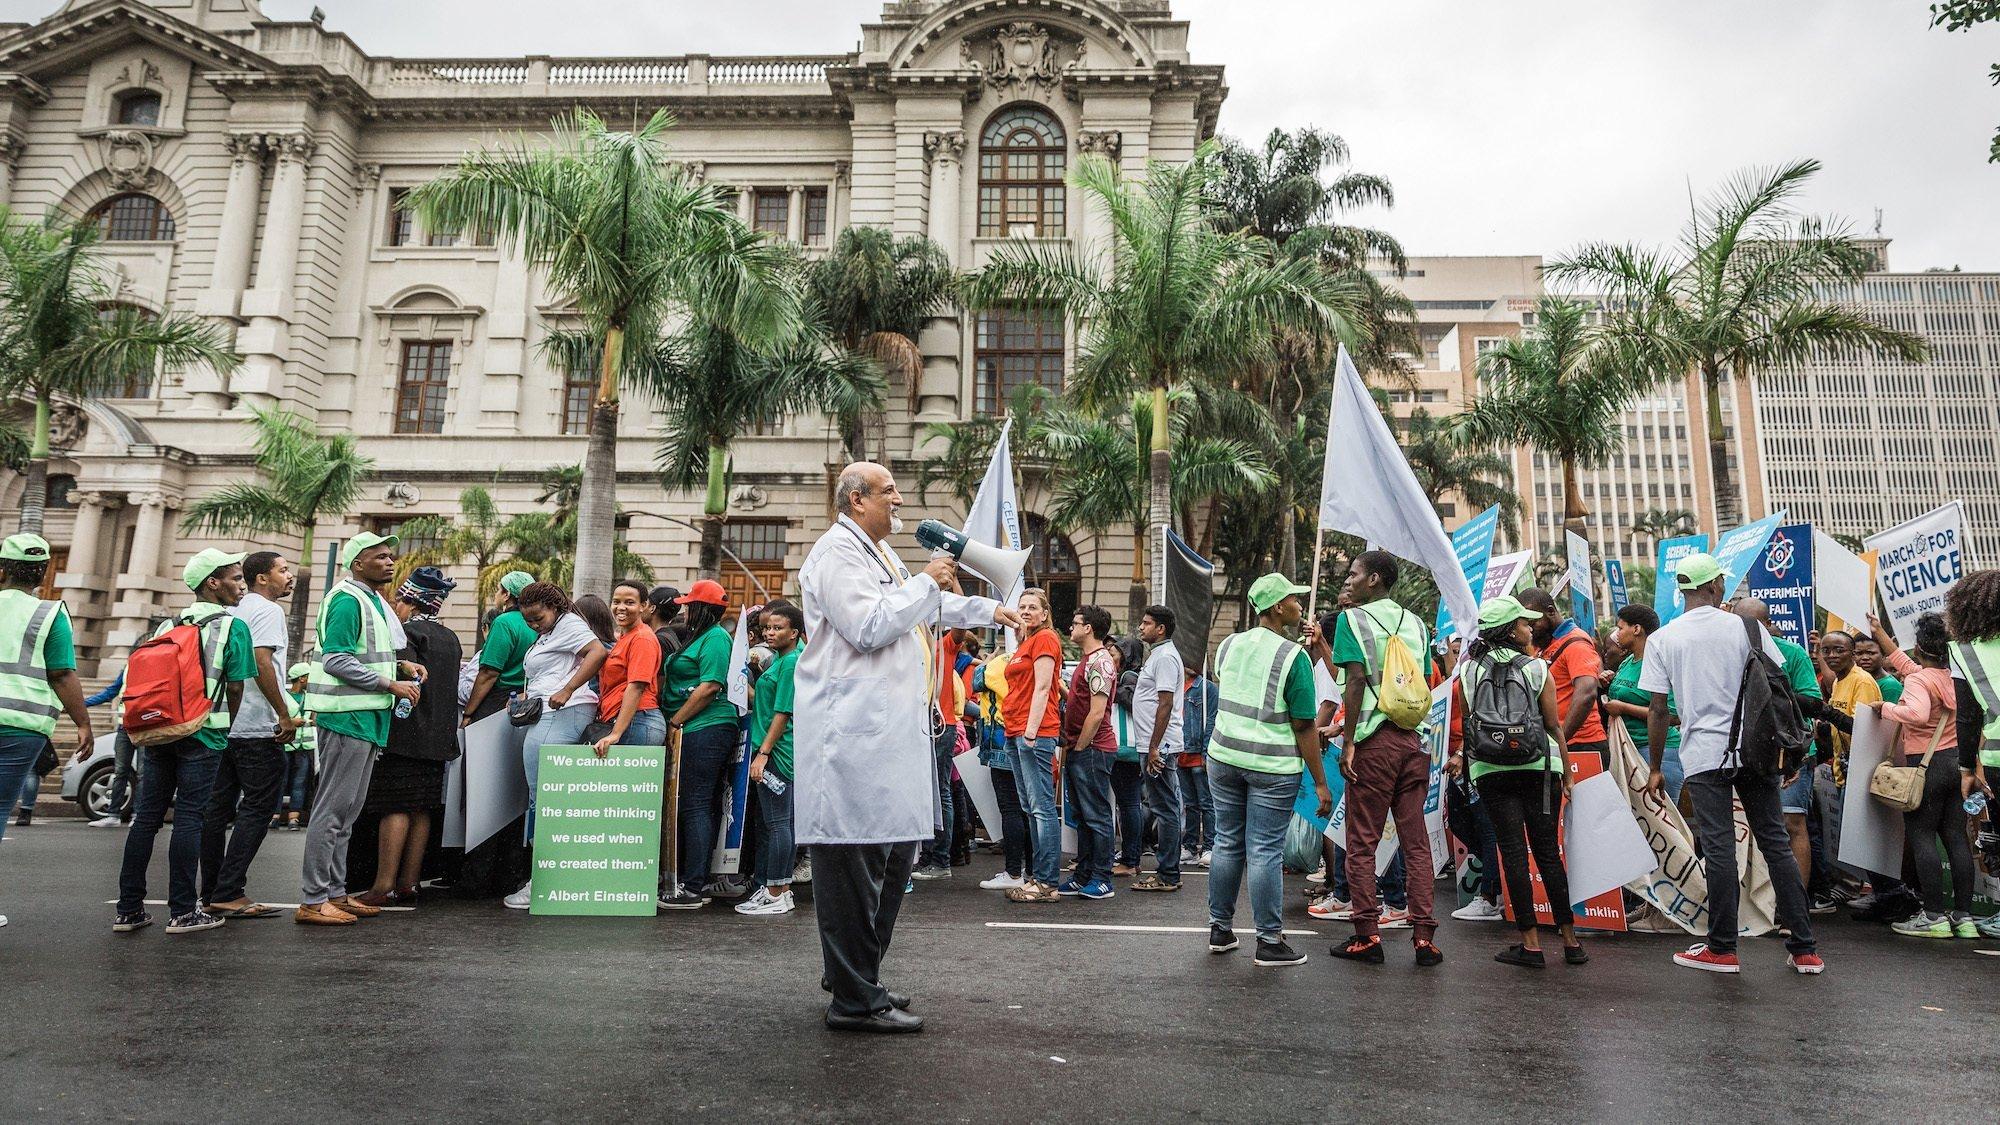 Scientist Professor Salim Abdool Karim, a South African epidemiologist and infectious diseasaes specialist, and one of the conveners of the march leads people during the 'March for Science' in Durban on April 14, 2018. – The march was organised by the University of KwaZulu-Natal (UKZN), the South African Medical Research Council (SAMRC), the South African Medical Students Association (SAMSA), the Centre for the AIDS Programme of South Africa (CAPRISA), and Global Laboratories. (Photo by RAJESH JANTILAL / AFP)